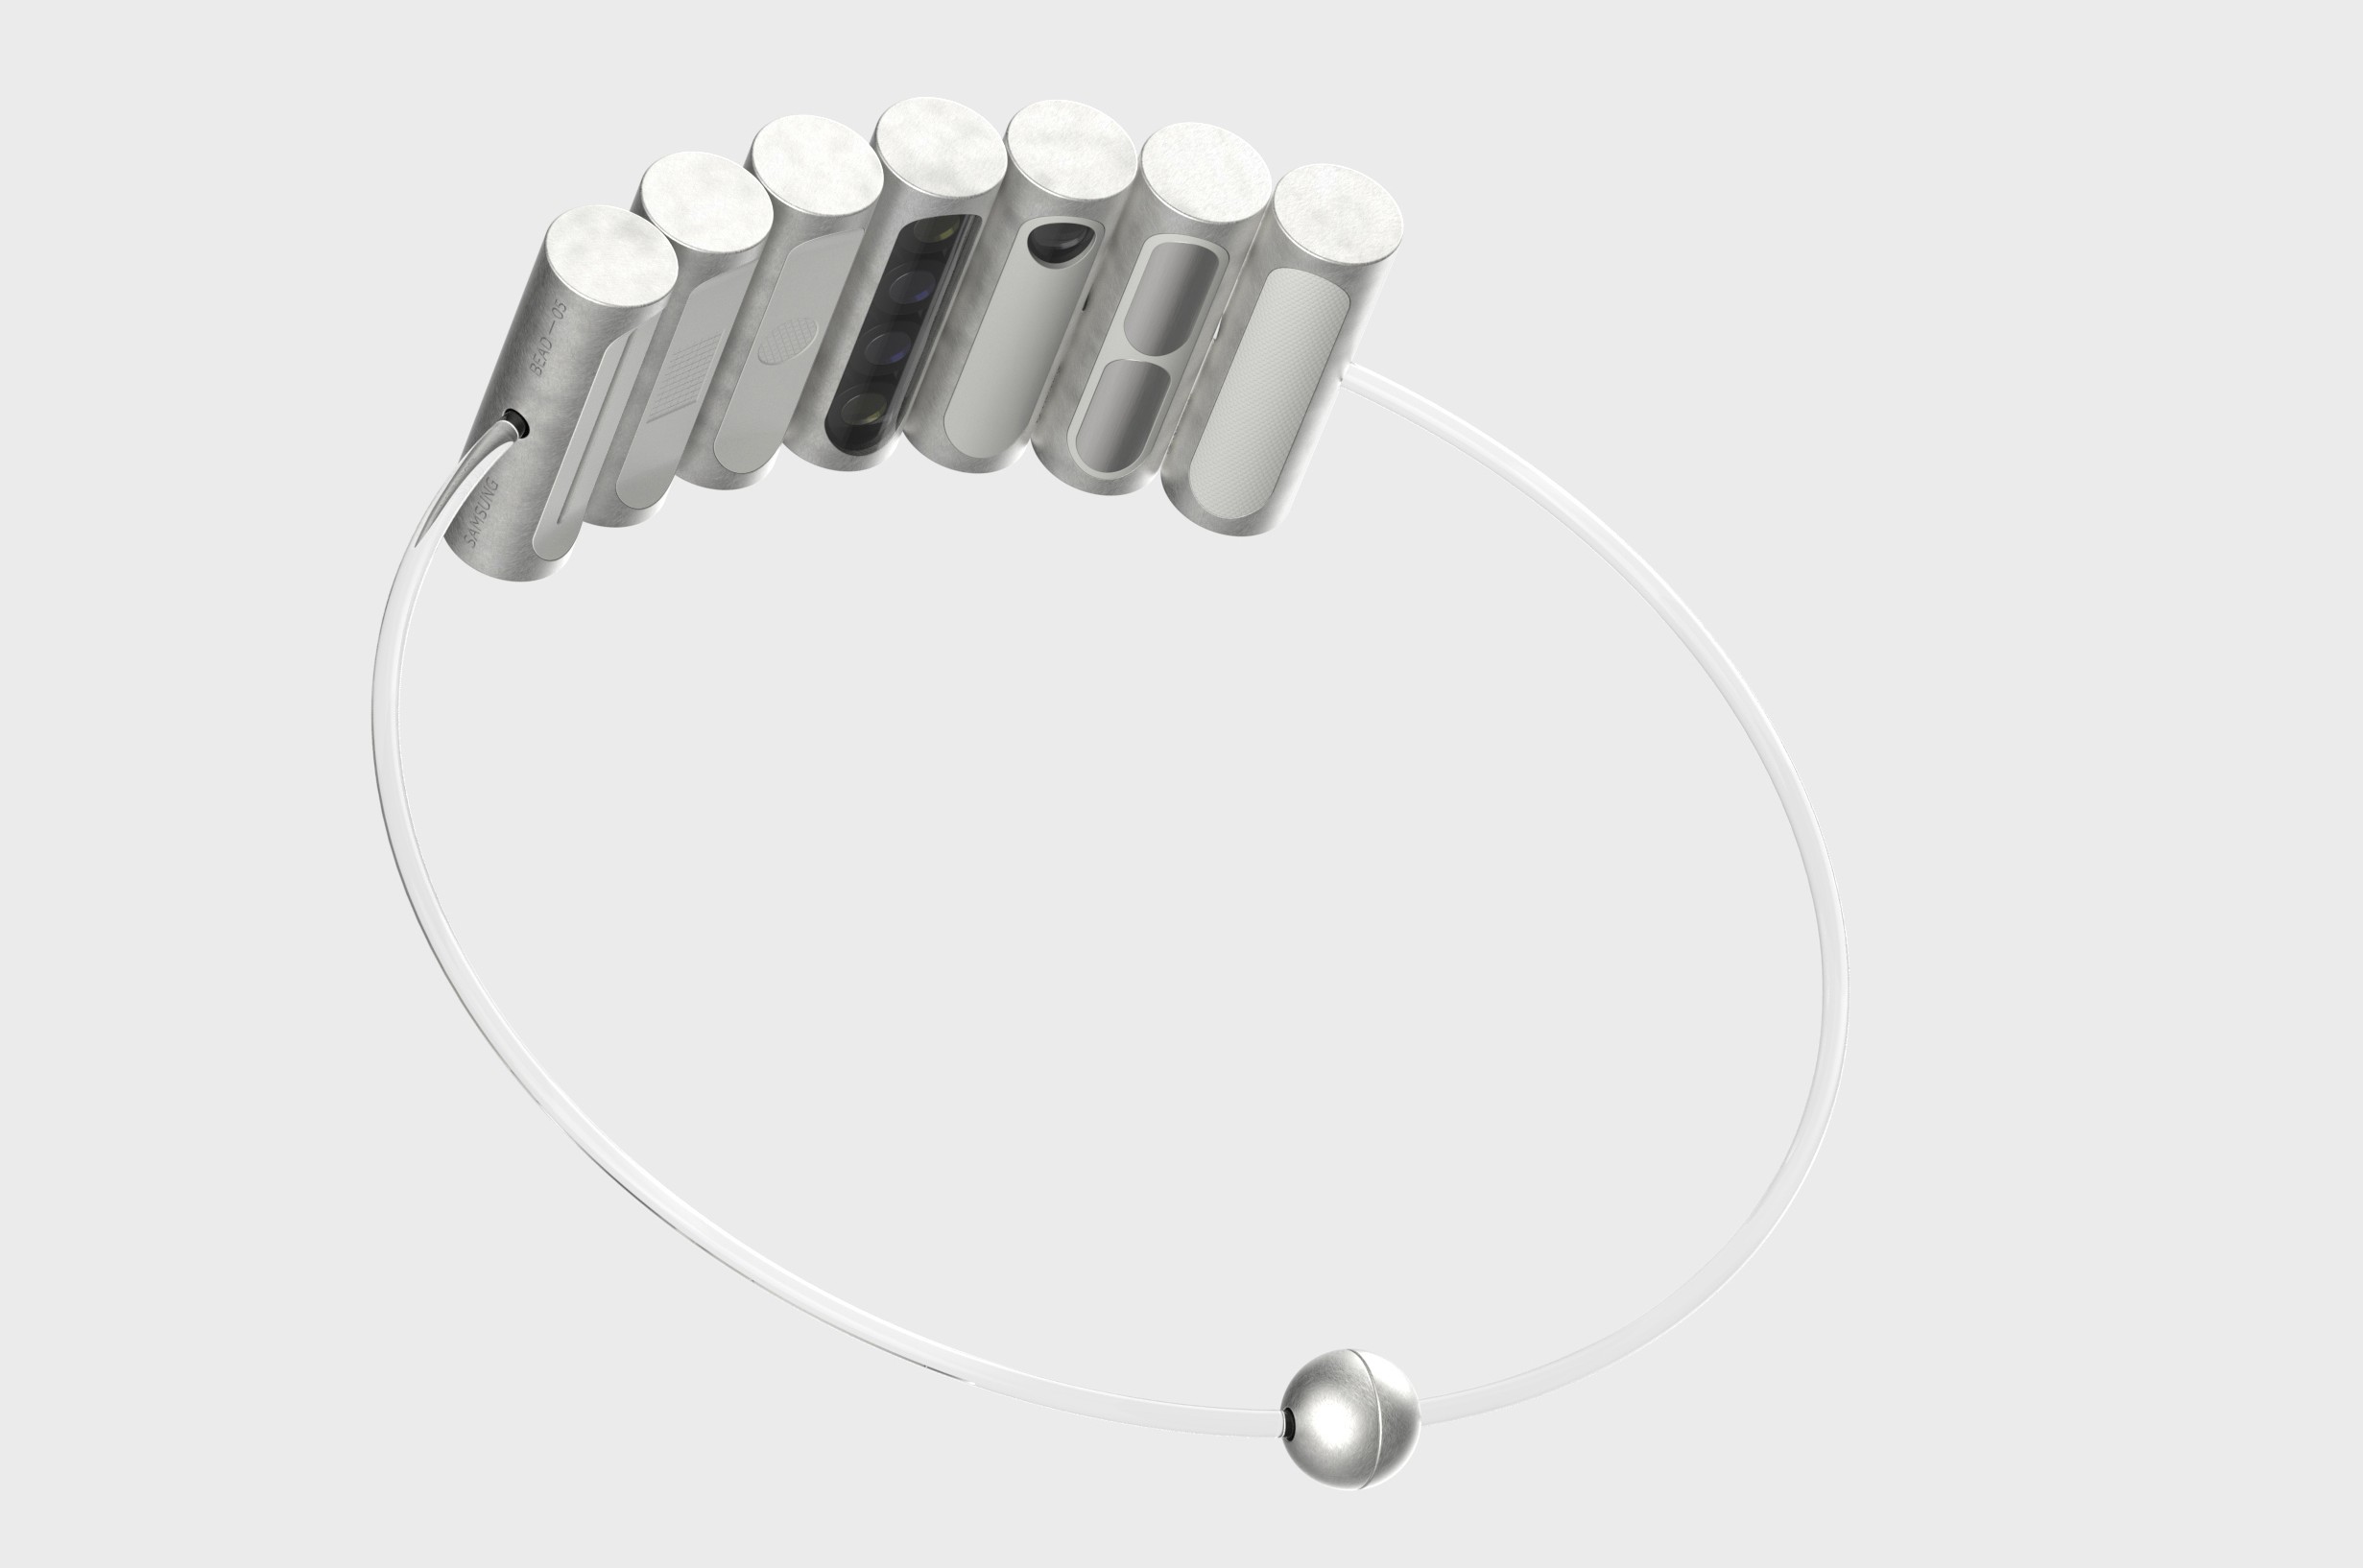 #This modular bracelet concept lets you choose how smart you want your jewelry to be